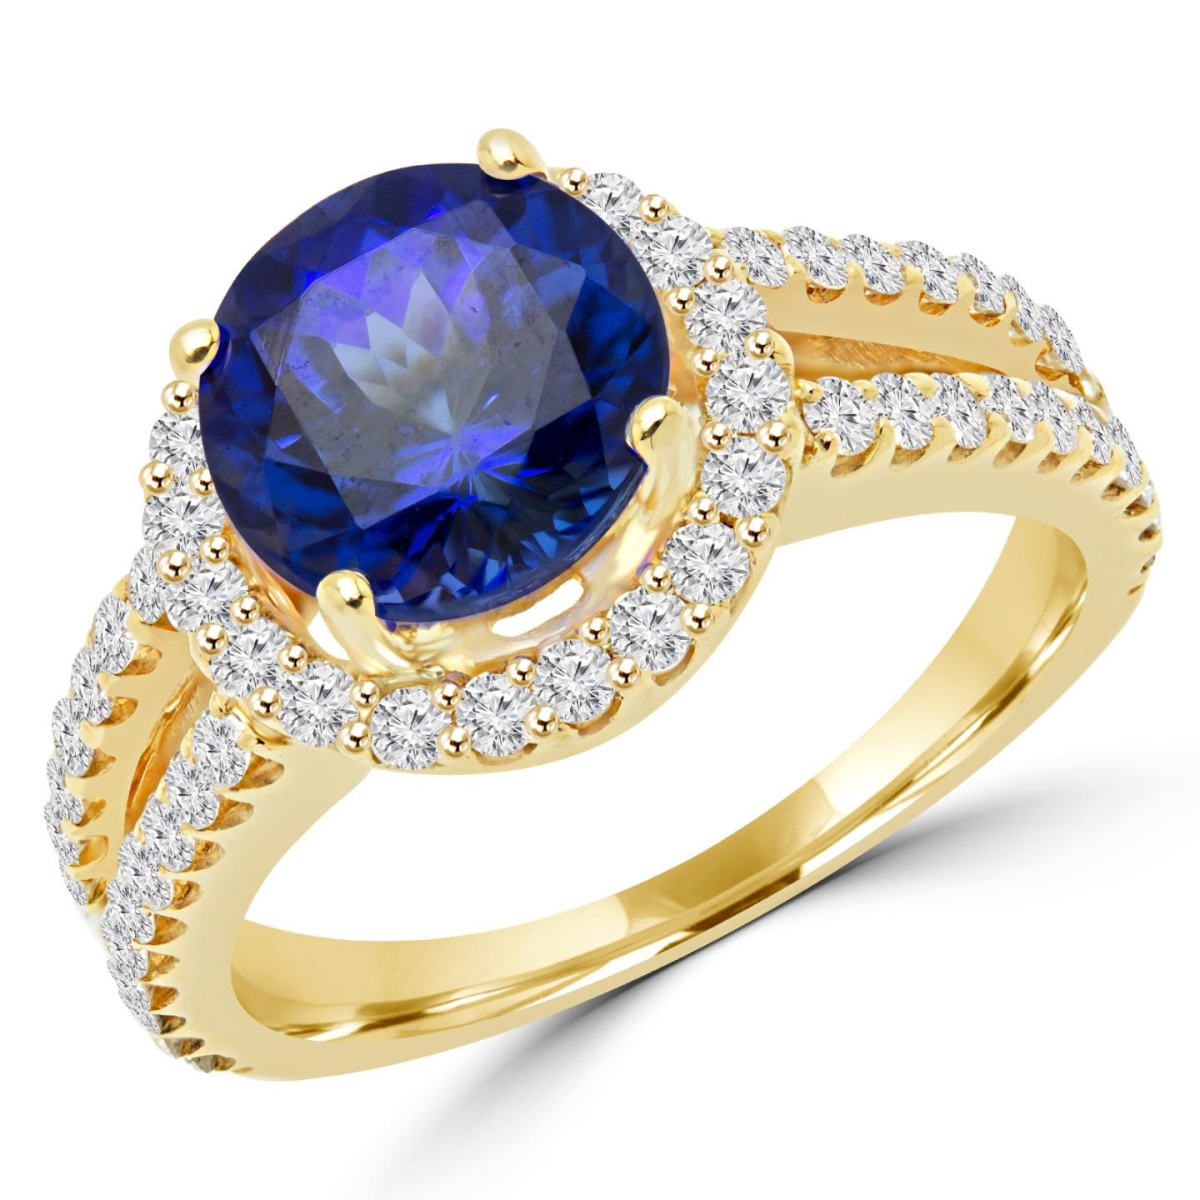 Md150166-3.25 3.1 Ctw Round Tanzanite & Diamond Halo Cocktail Ring In 18k Yellow Gold, Size 3.25